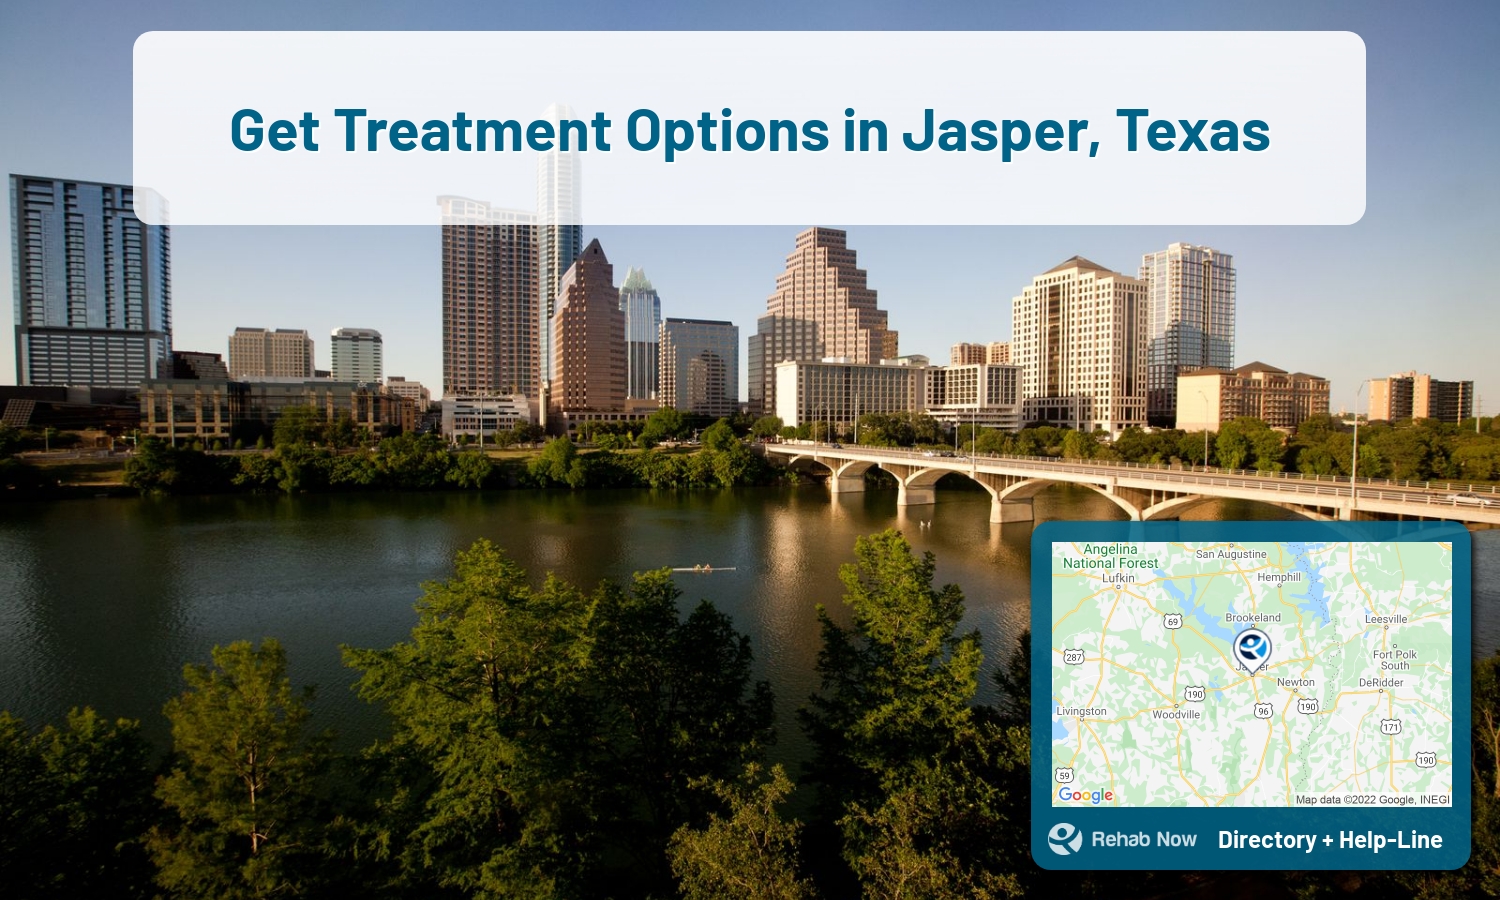 List of alcohol and drug treatment centers near you in Jasper, Texas. Research certifications, programs, methods, pricing, and more.